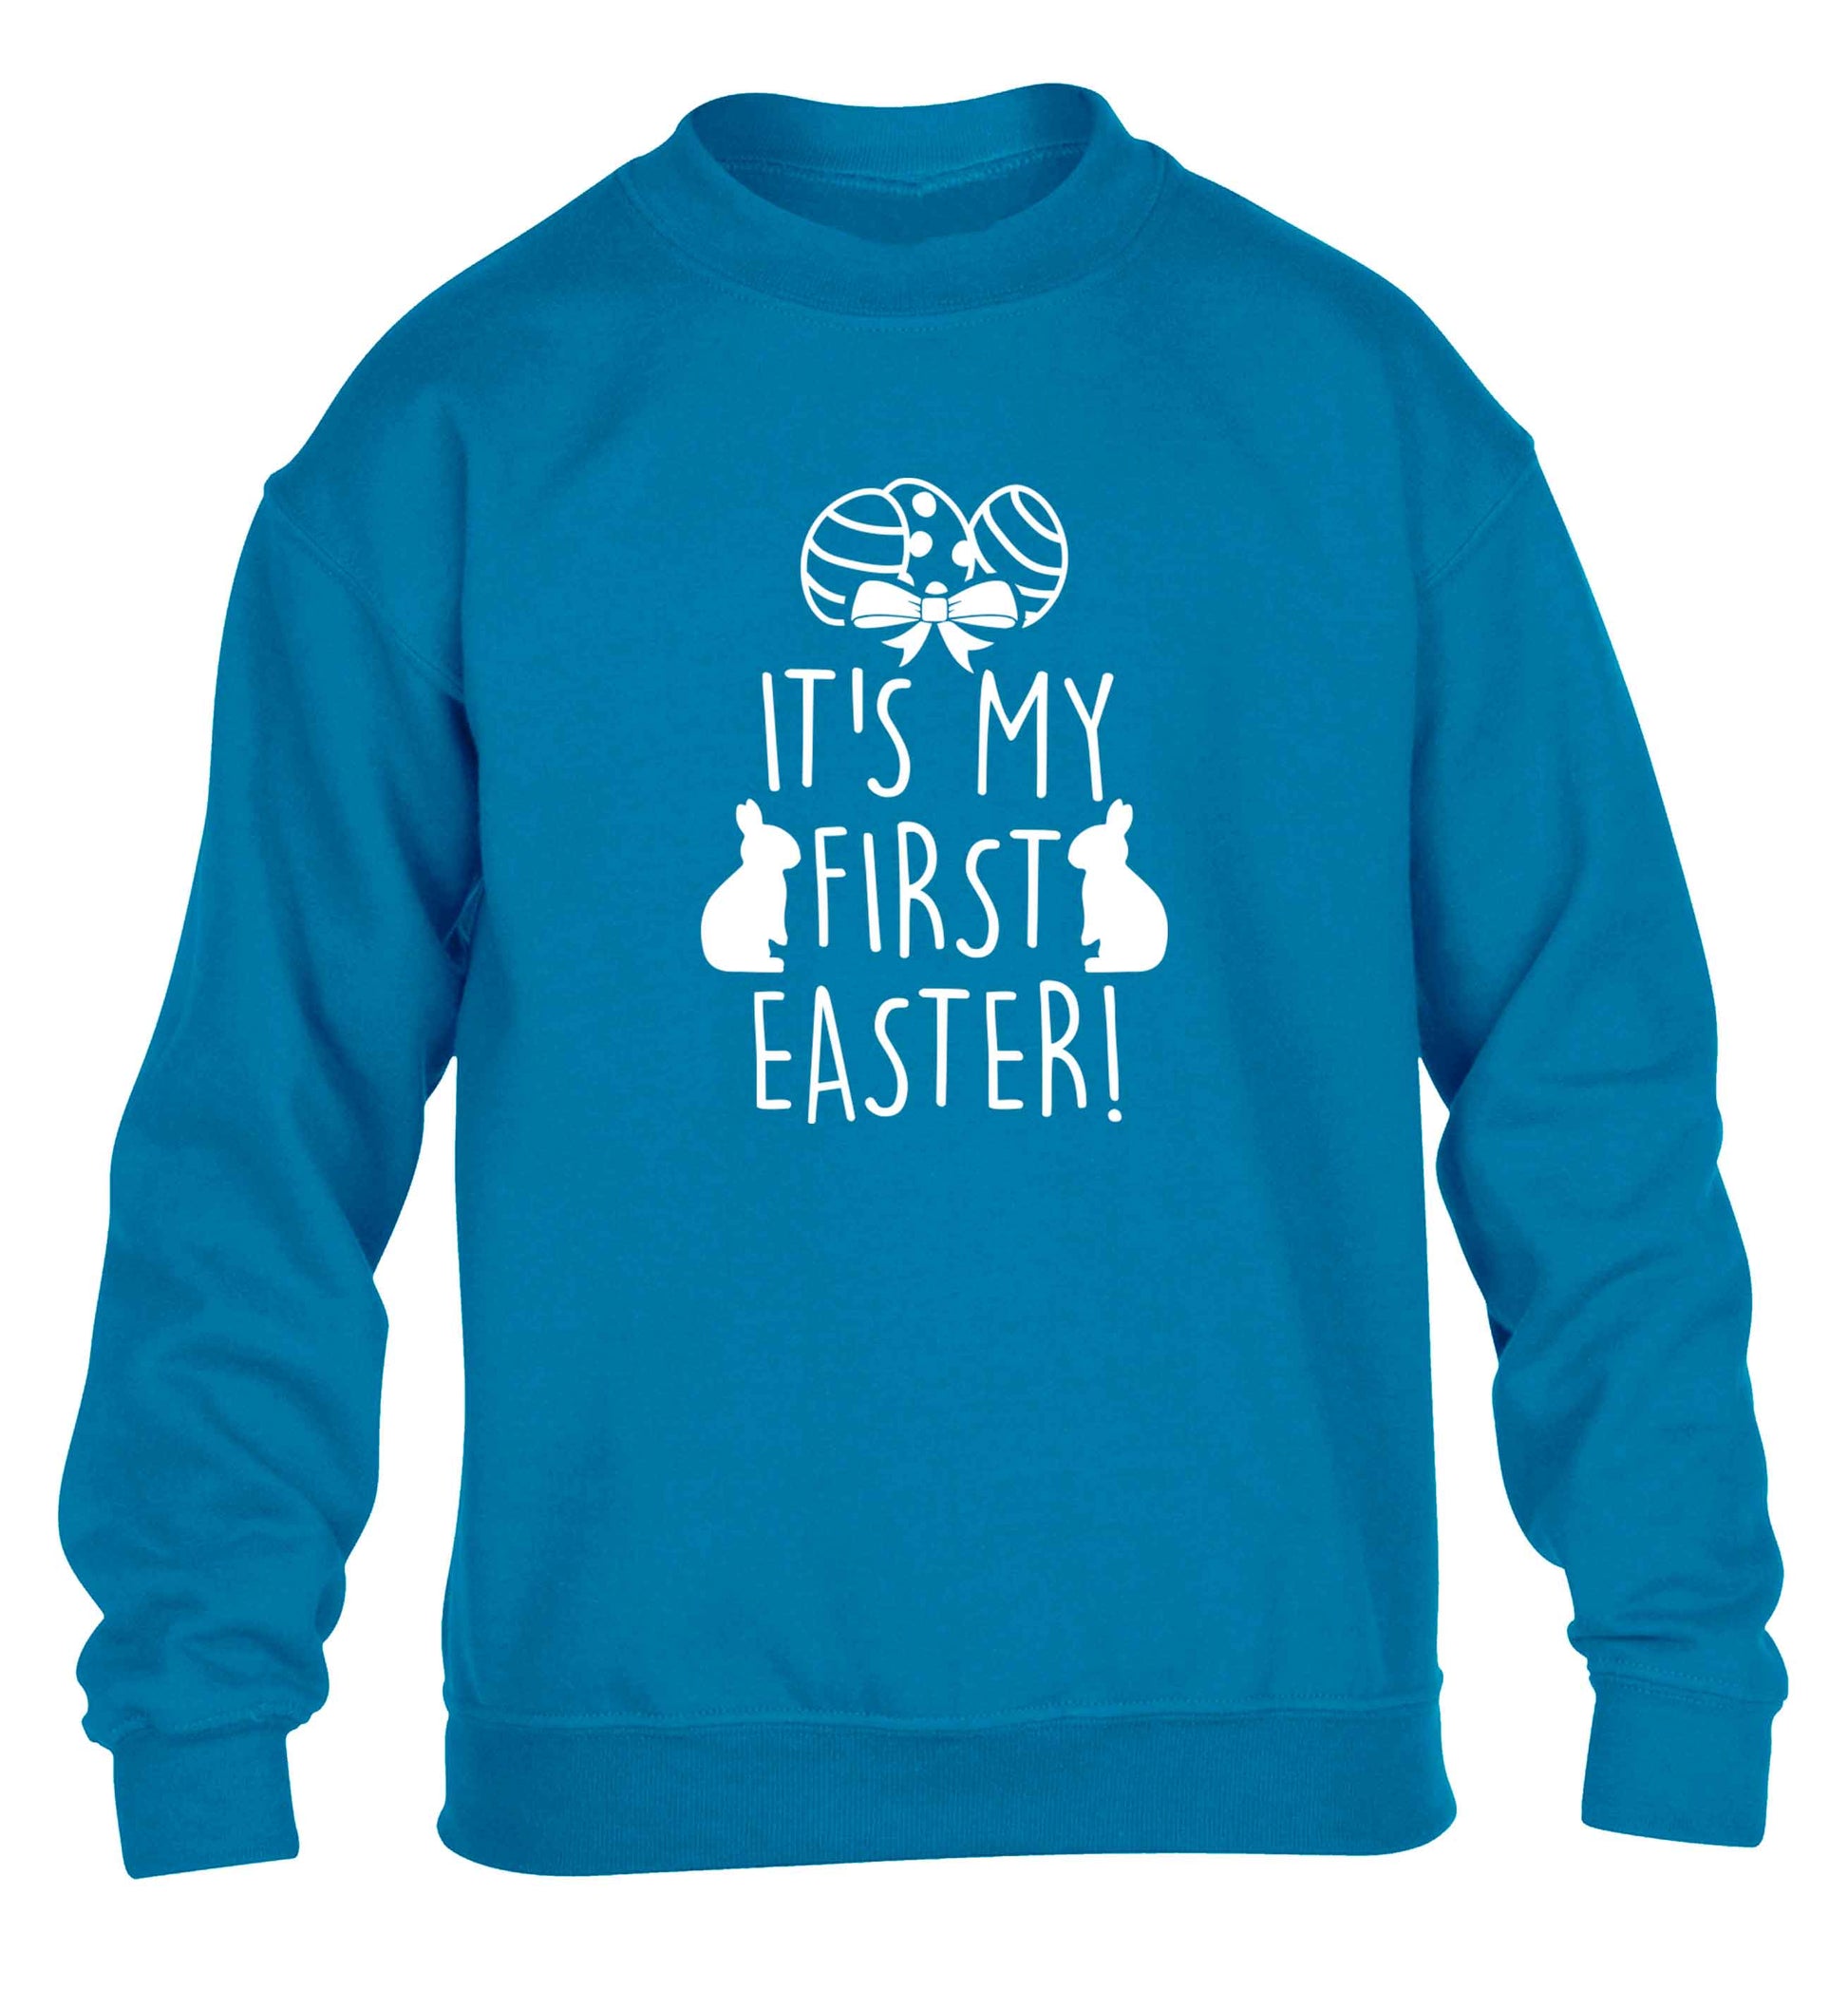 It's my first Easter children's blue sweater 12-13 Years